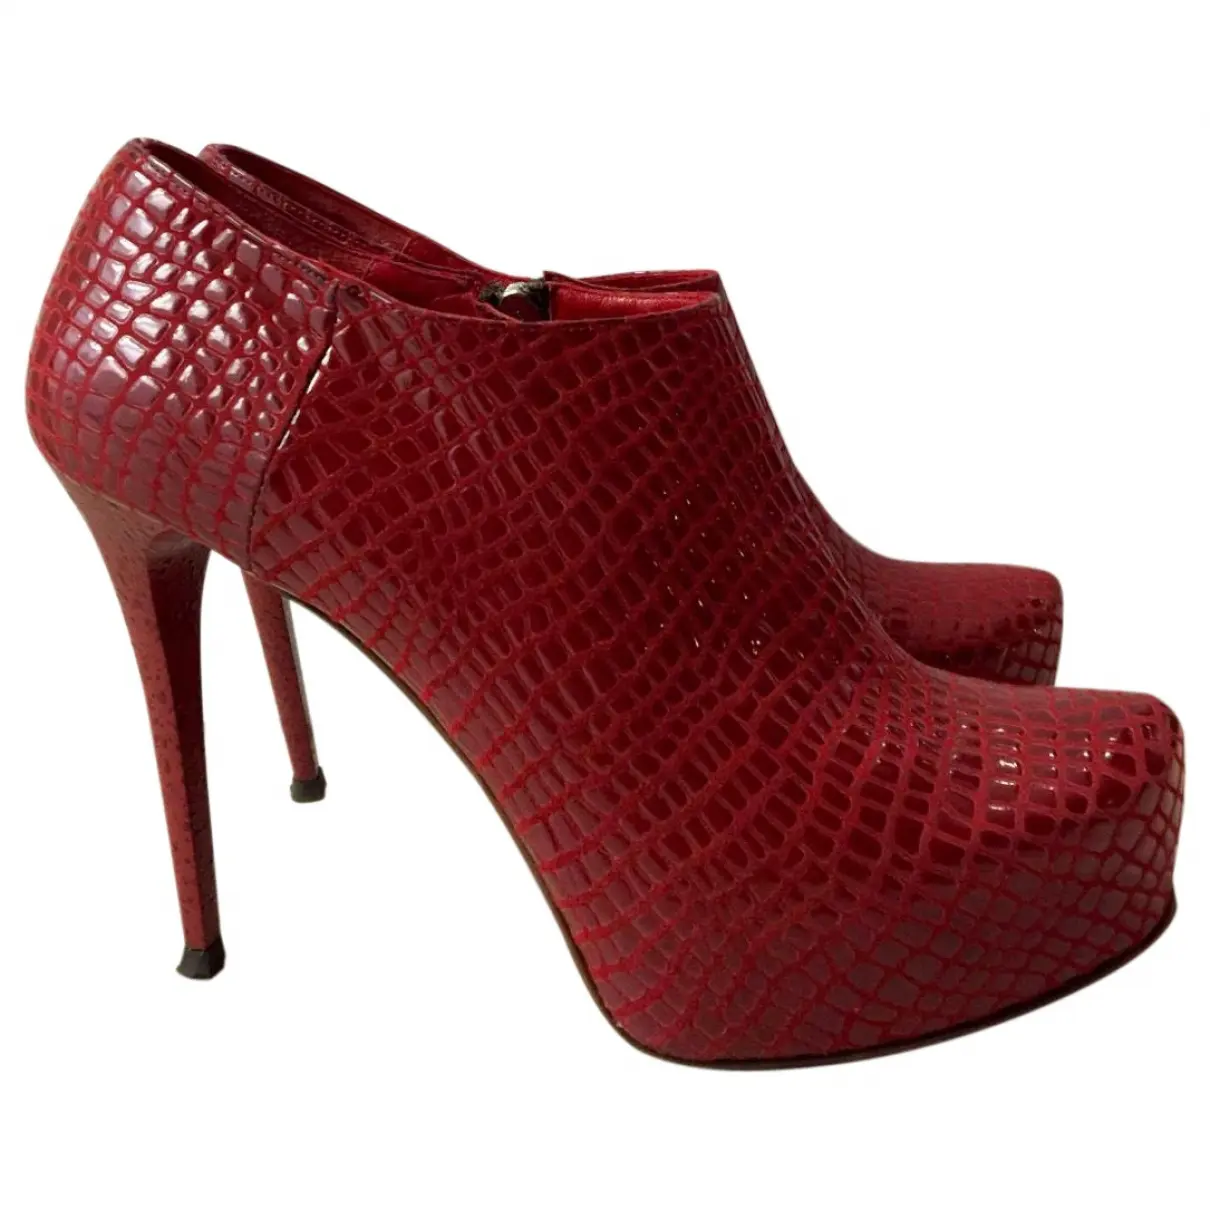 Patent leather ankle boots Gianmarco Lorenzi